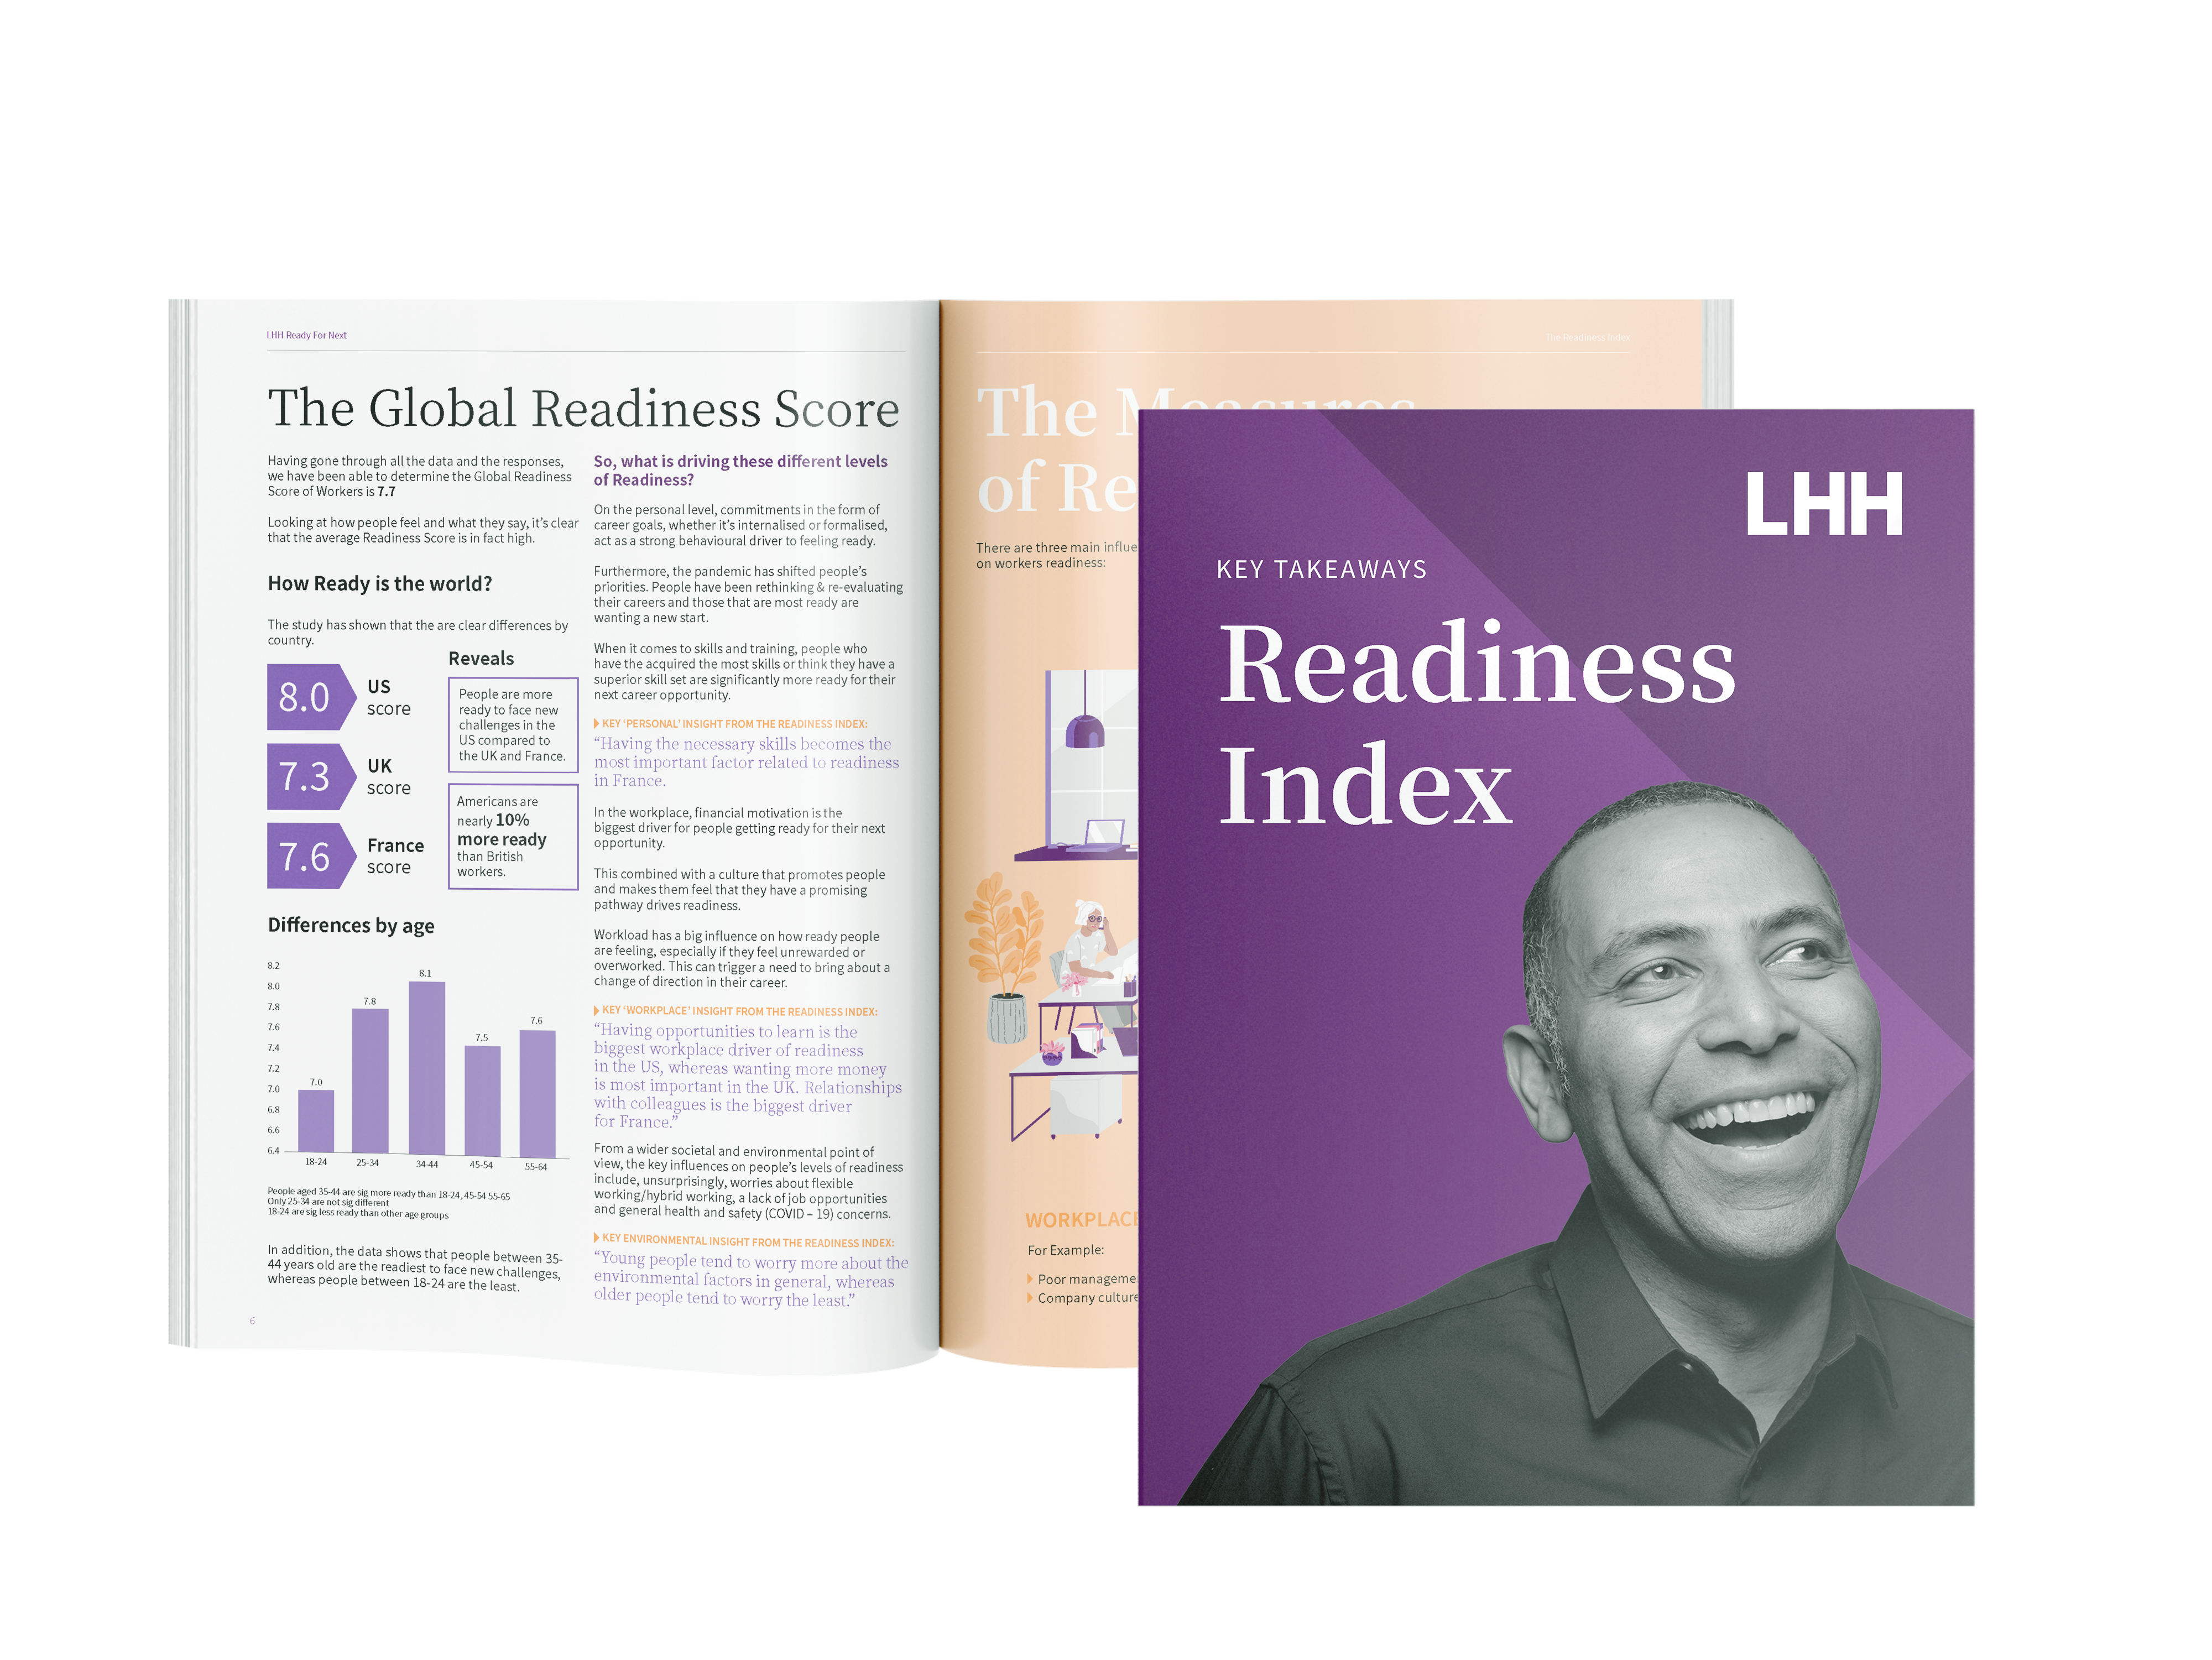 Thumbnail image of the 2022 Readiness Index white paper, with the cover and 2 inside pages being shown.